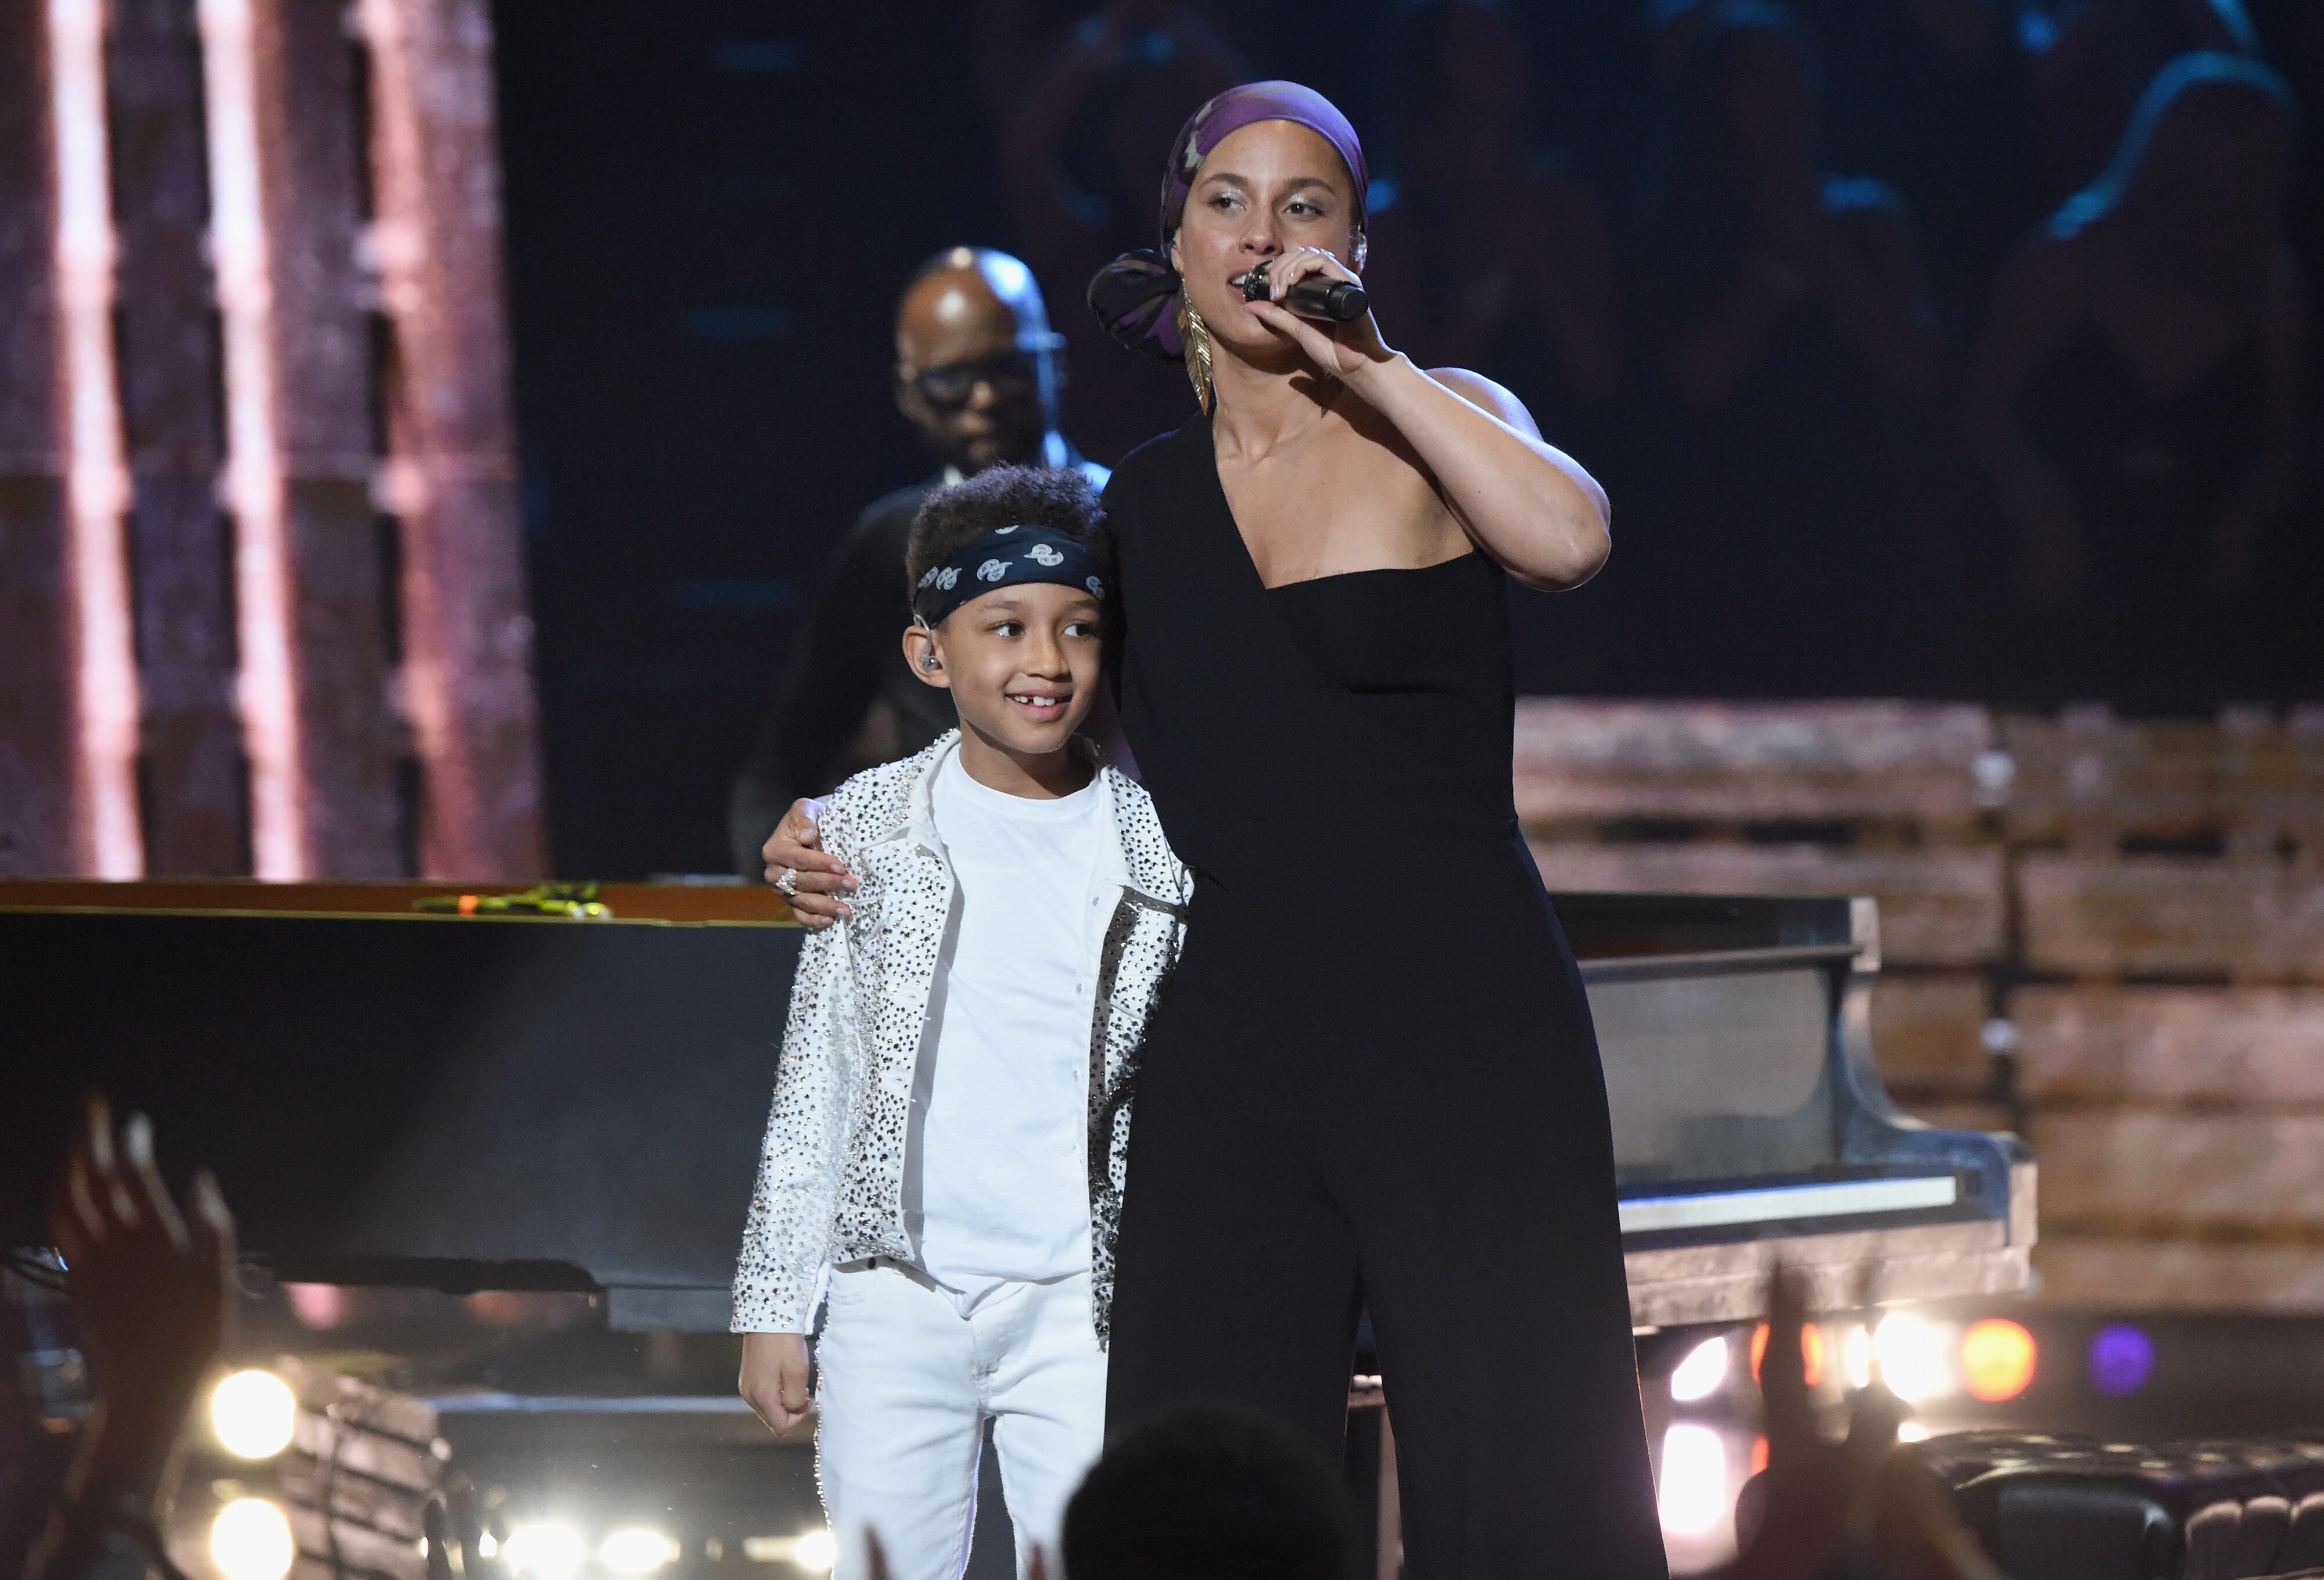 Alicia Keys on stage with son Egypt at the 2019 iHeartRadio Music Awards | Source: Getty Images